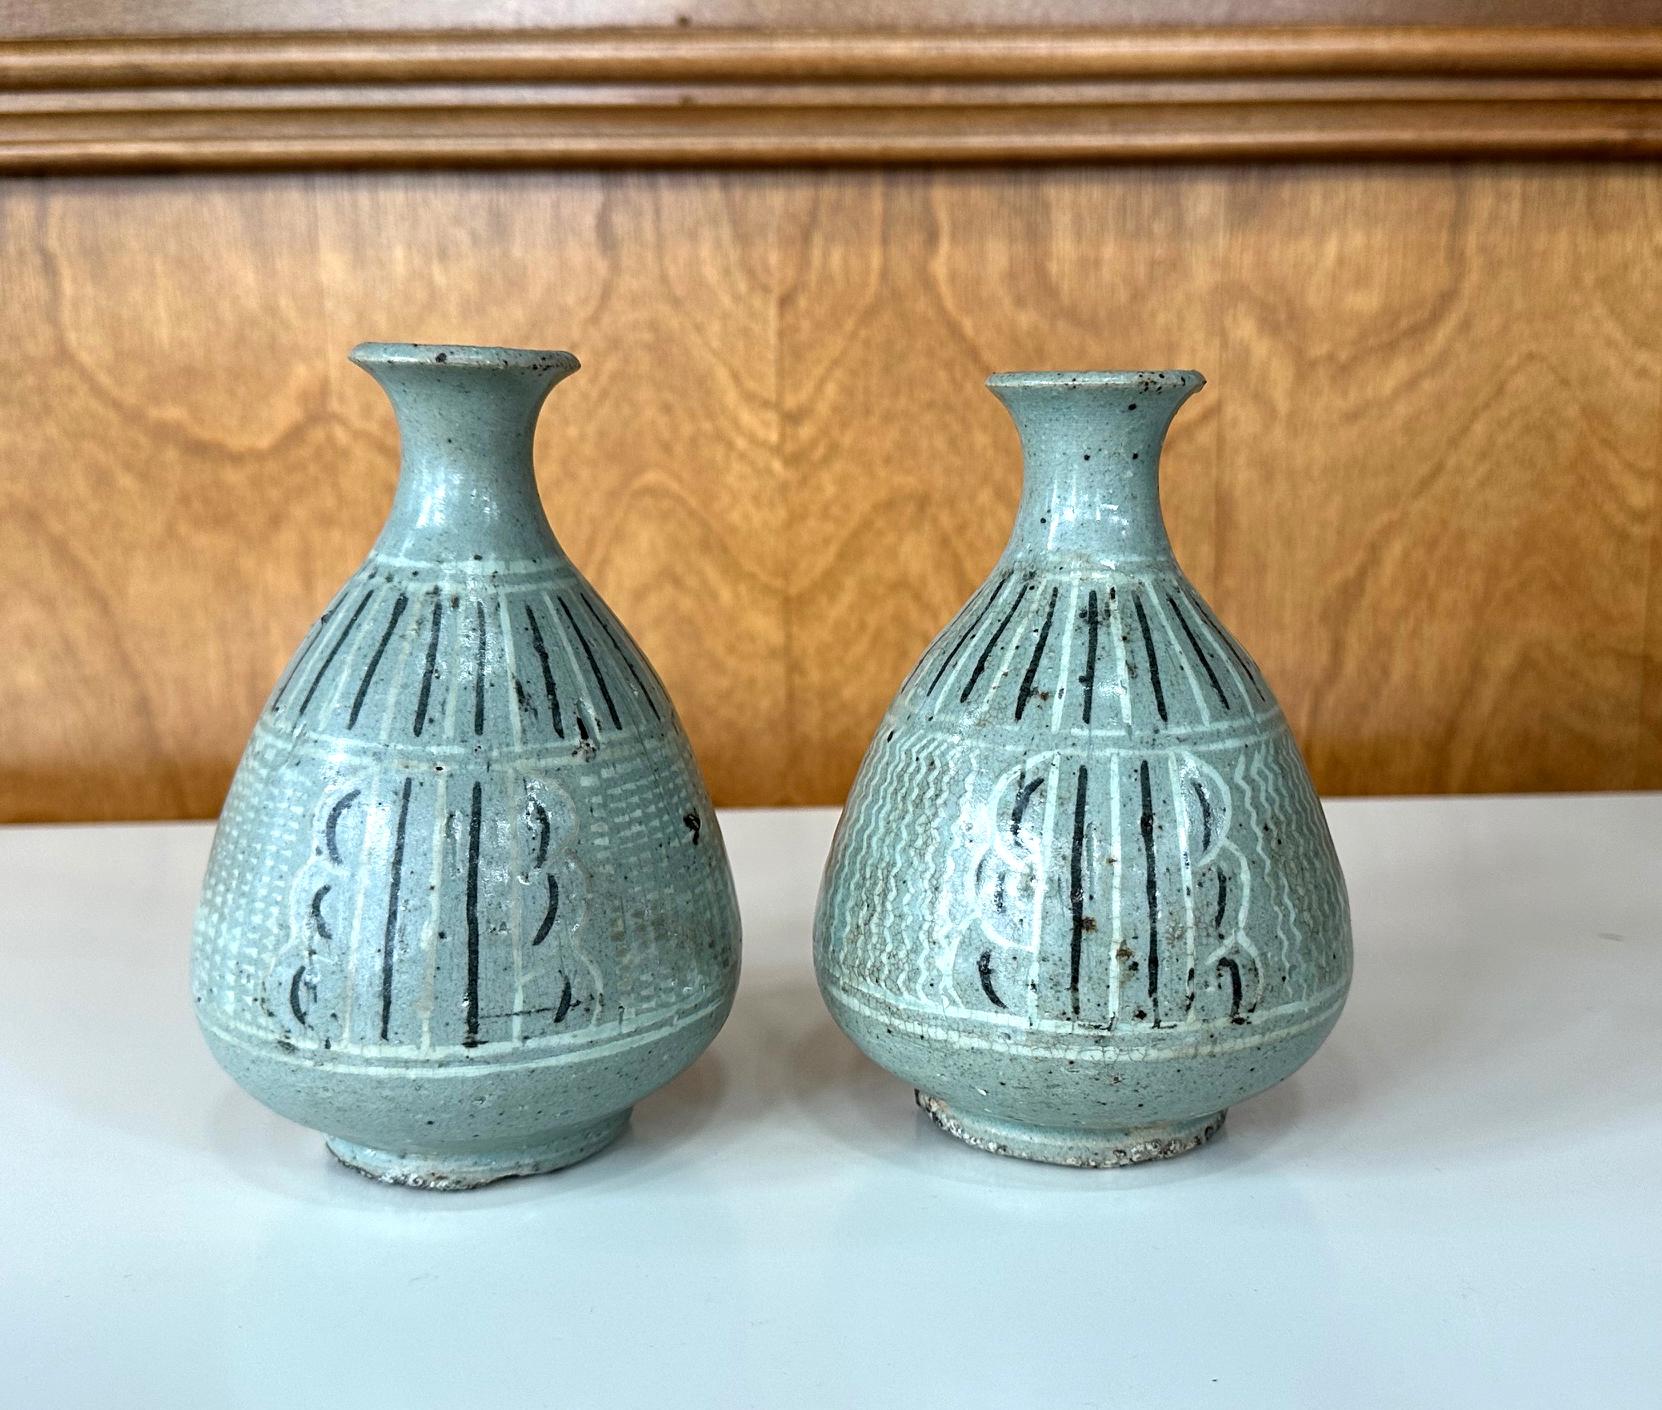 On offer is a near pair antique Korean ceramic vase from the end of Goryeo to the beginning of Joseon period (circa 14-15th). The vases feature celadon crackled glaze with underglaze inlay design in black and white. This type of vase is considered a